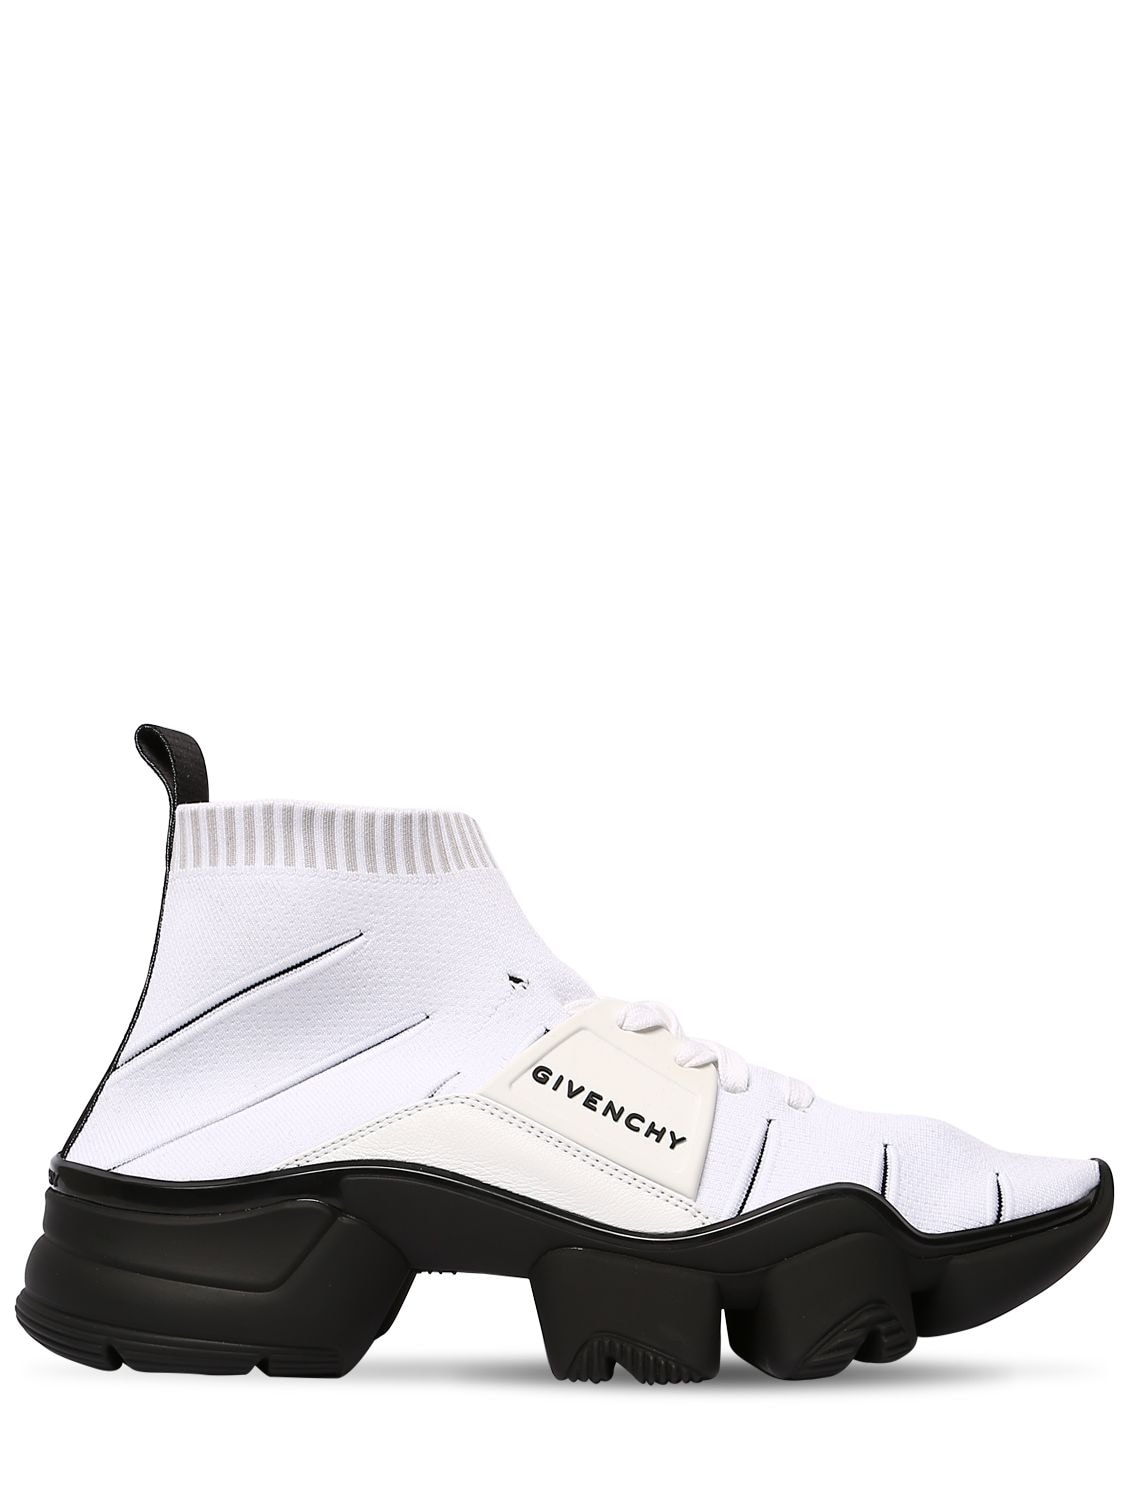 givenchy sock shoes